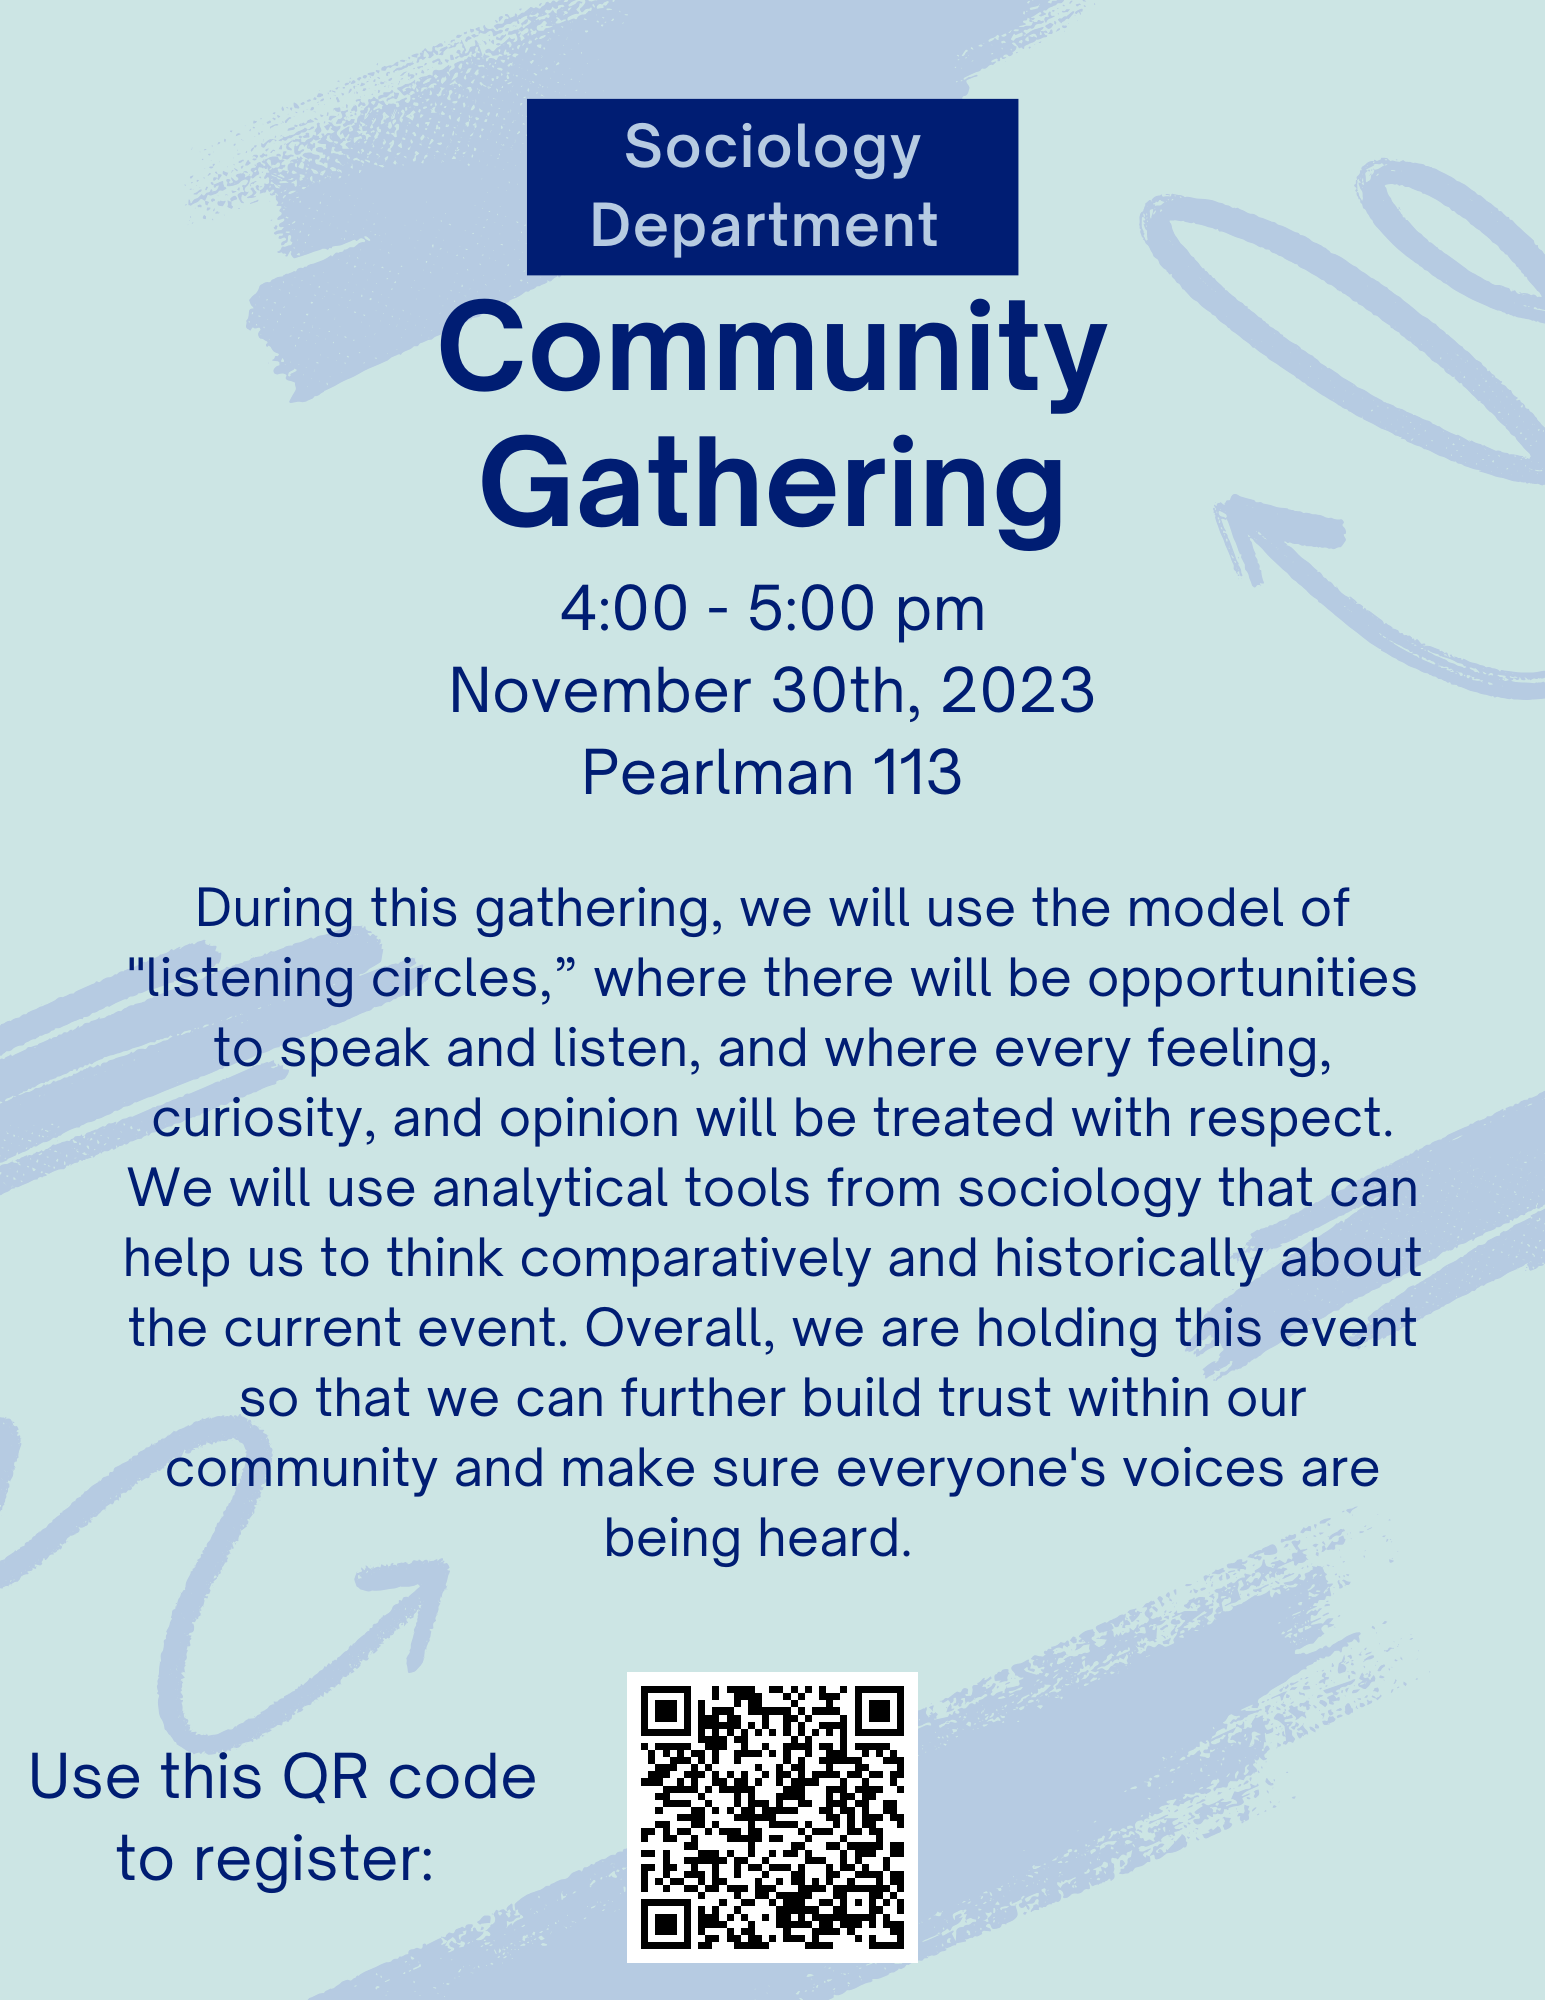 Blue background flyer saying there is a community gathering on November 30th from 4:00pm to 5:00pm in Pearlman 113